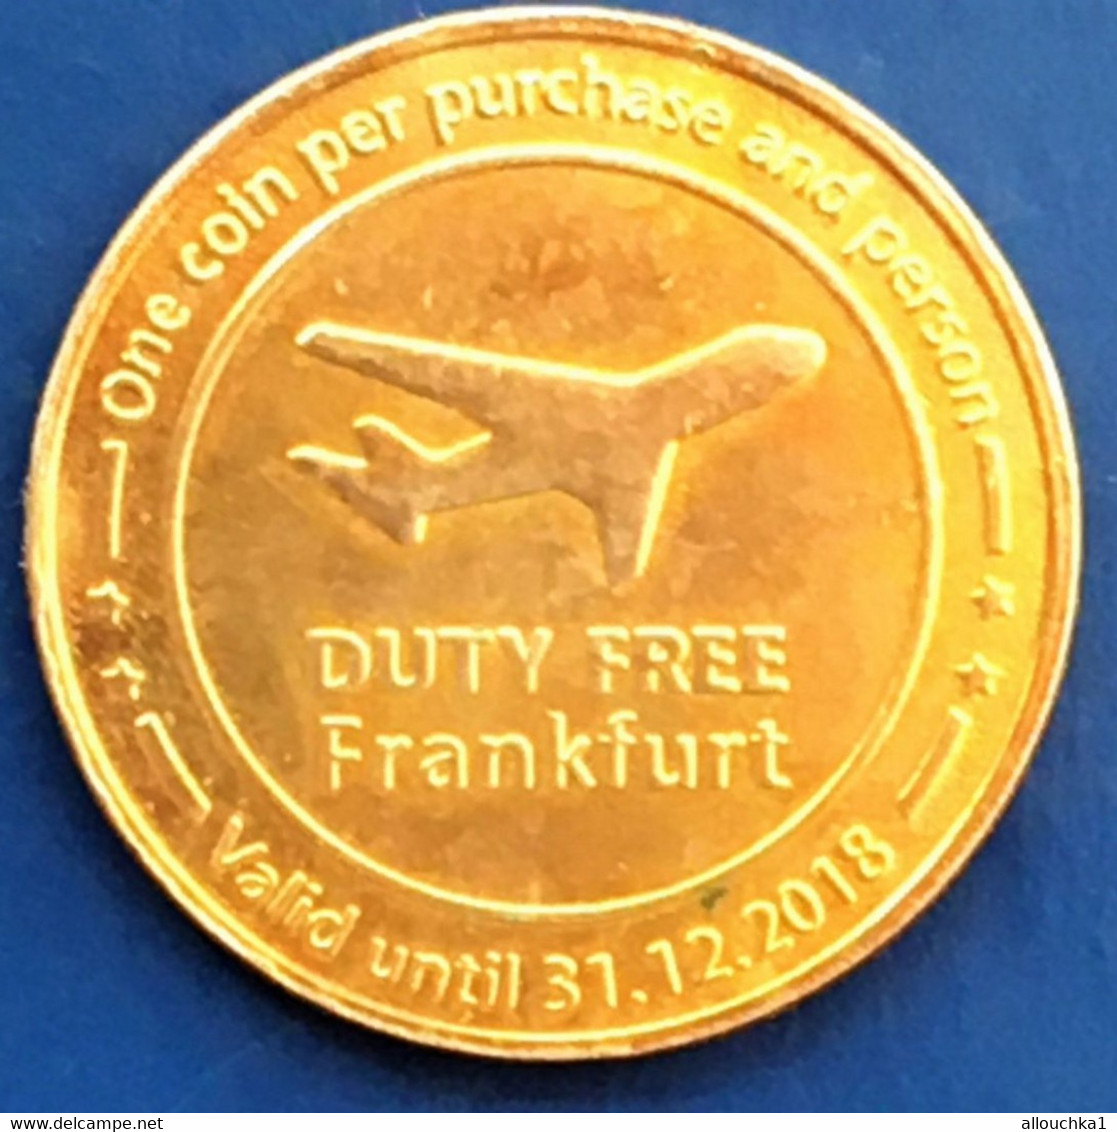 Exclusive At Frankfurt Airport-Frankfort Aéroport-Duty Free One Coin Per Purchase And Person-Valid Limit 31-12-2018--2€ - Profesionales/De Sociedad